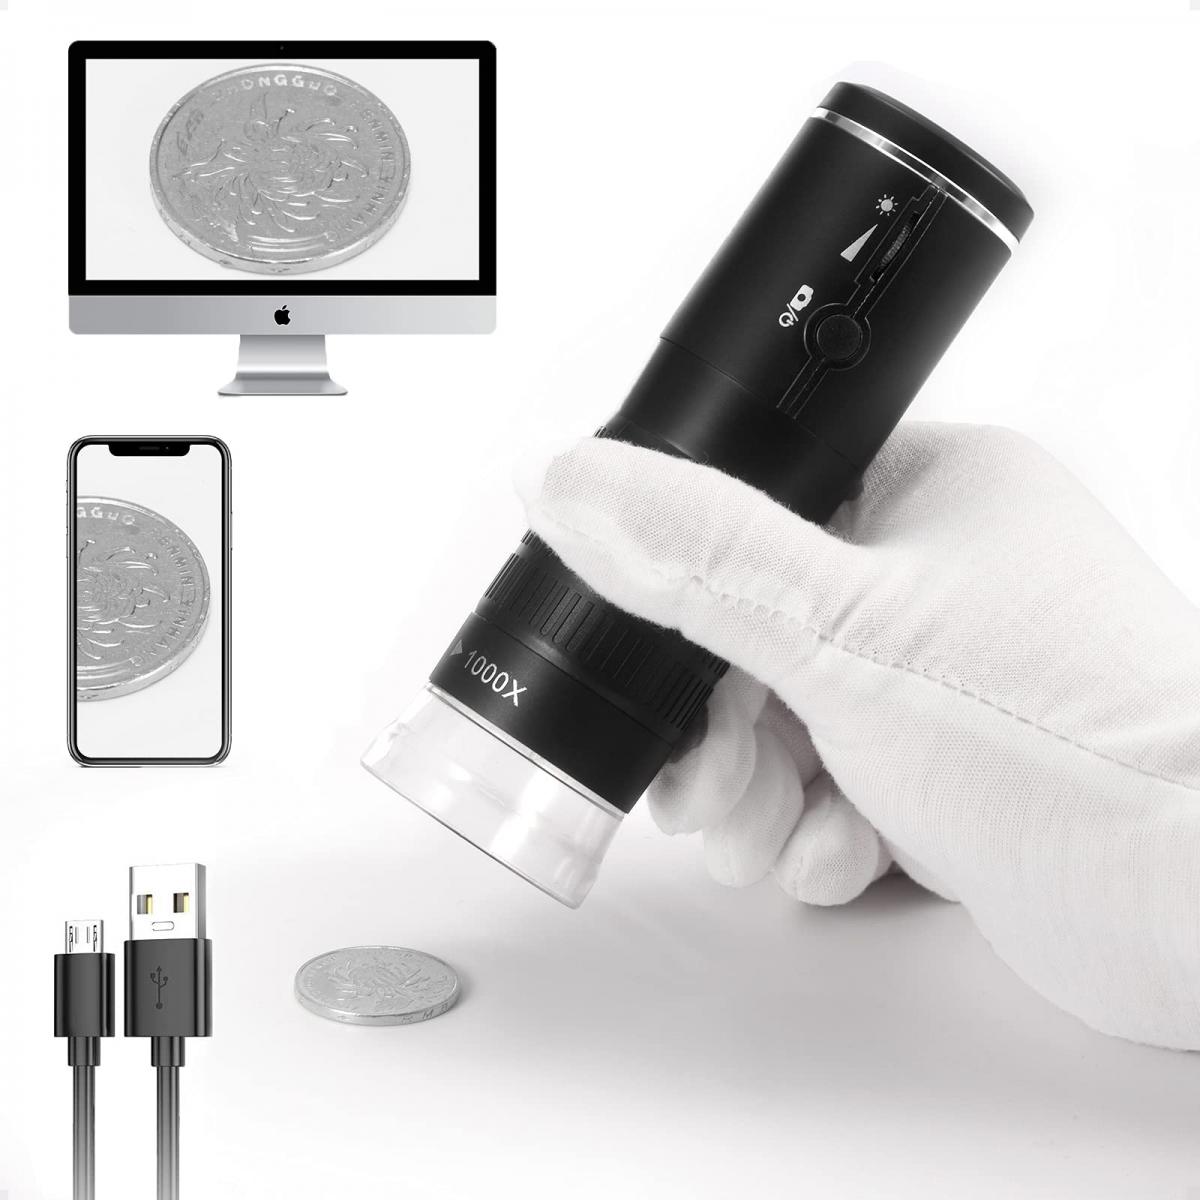 Wireless Digital Microscope,50X to 1000X Handheld USB Microscope,1080P Magnification Endoscope WiFi Microscope Camera,8 LED,Suitable for Adults/Kids,with Android and iOS iPad MAC Windows 